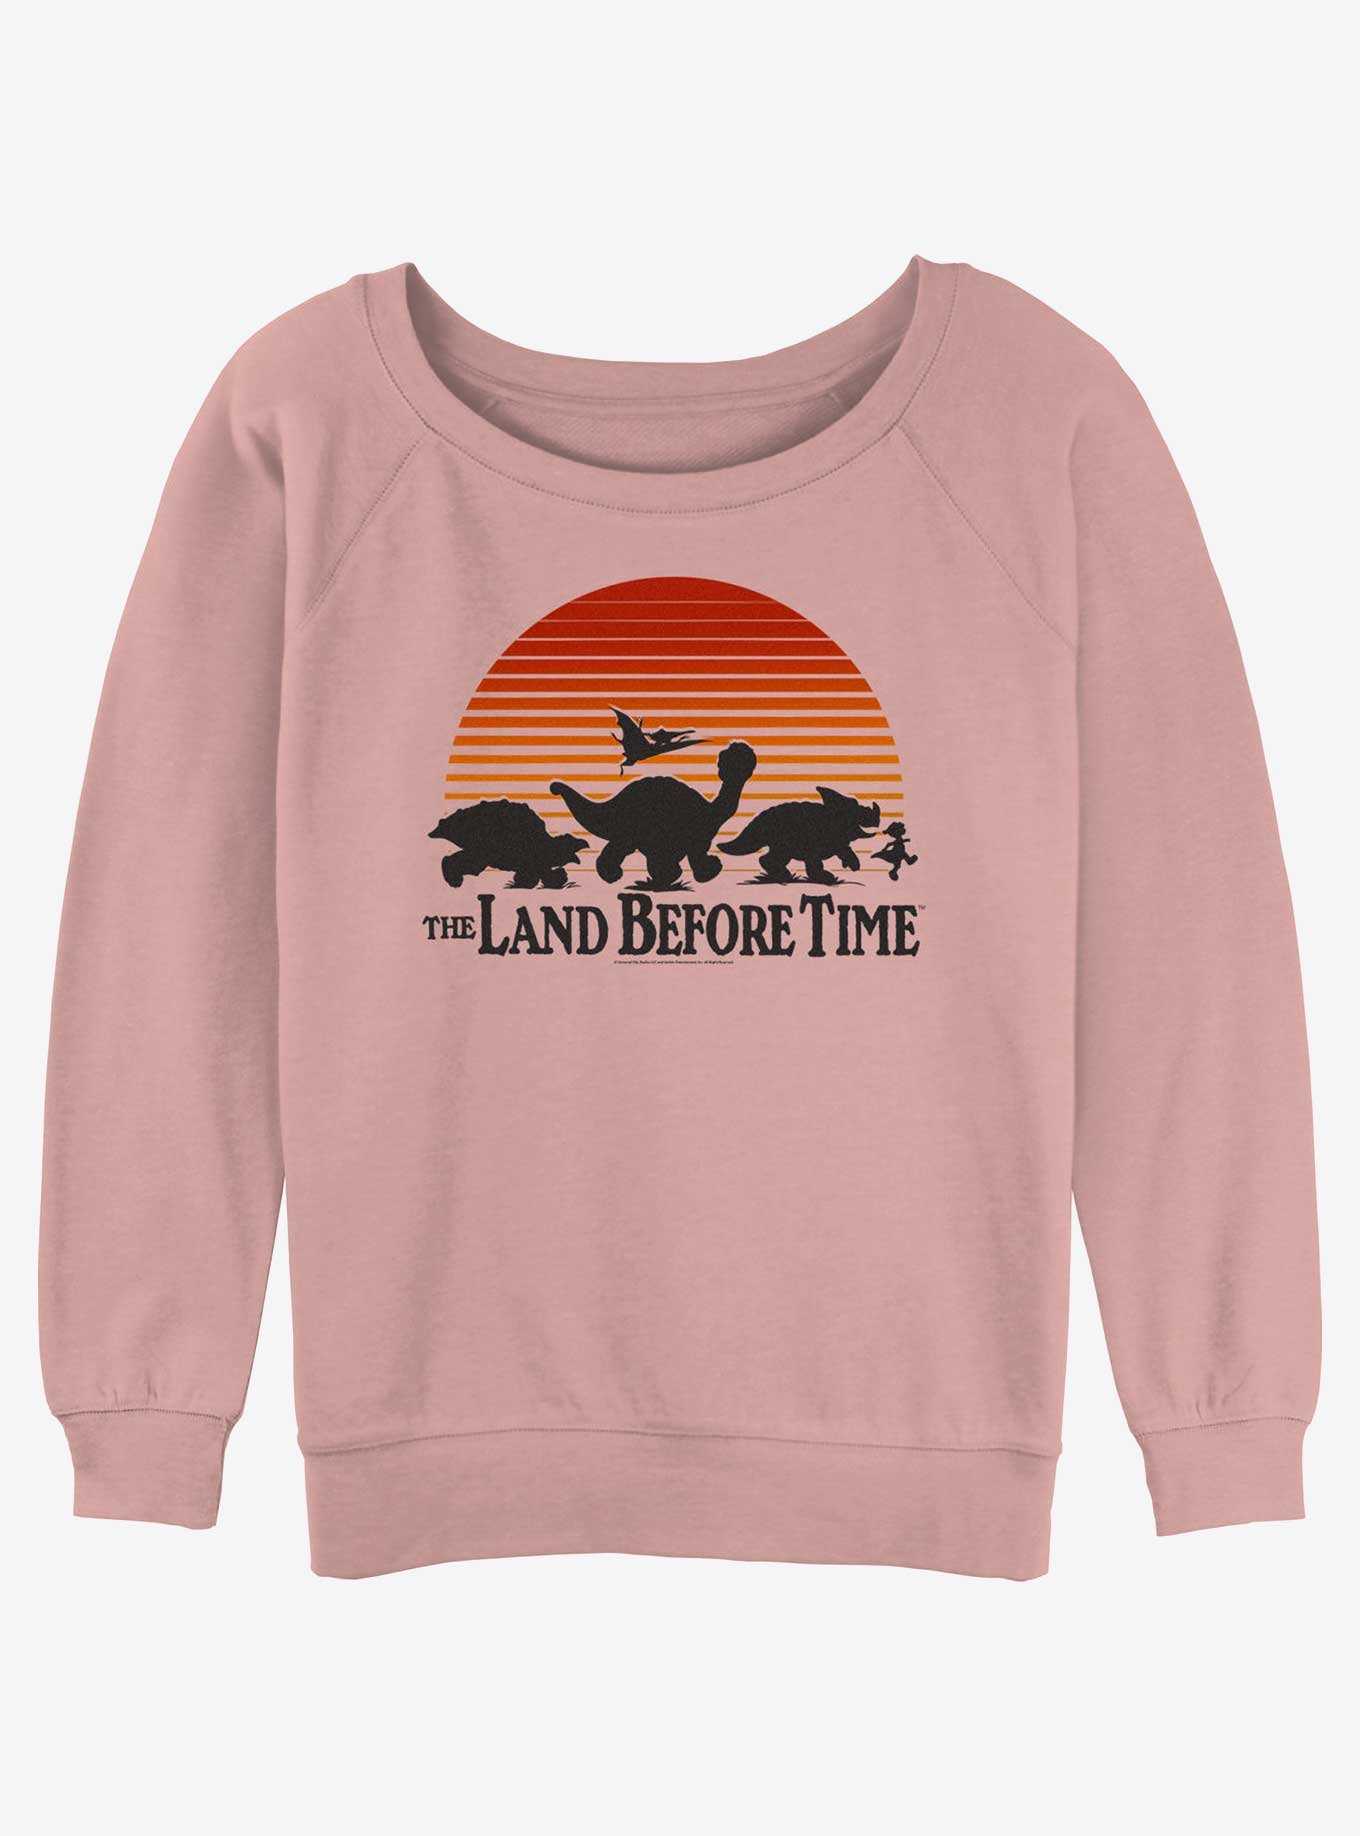 The Land Before Time Sunset Silhouette Girls Slouchy Sweatshirt, , hi-res